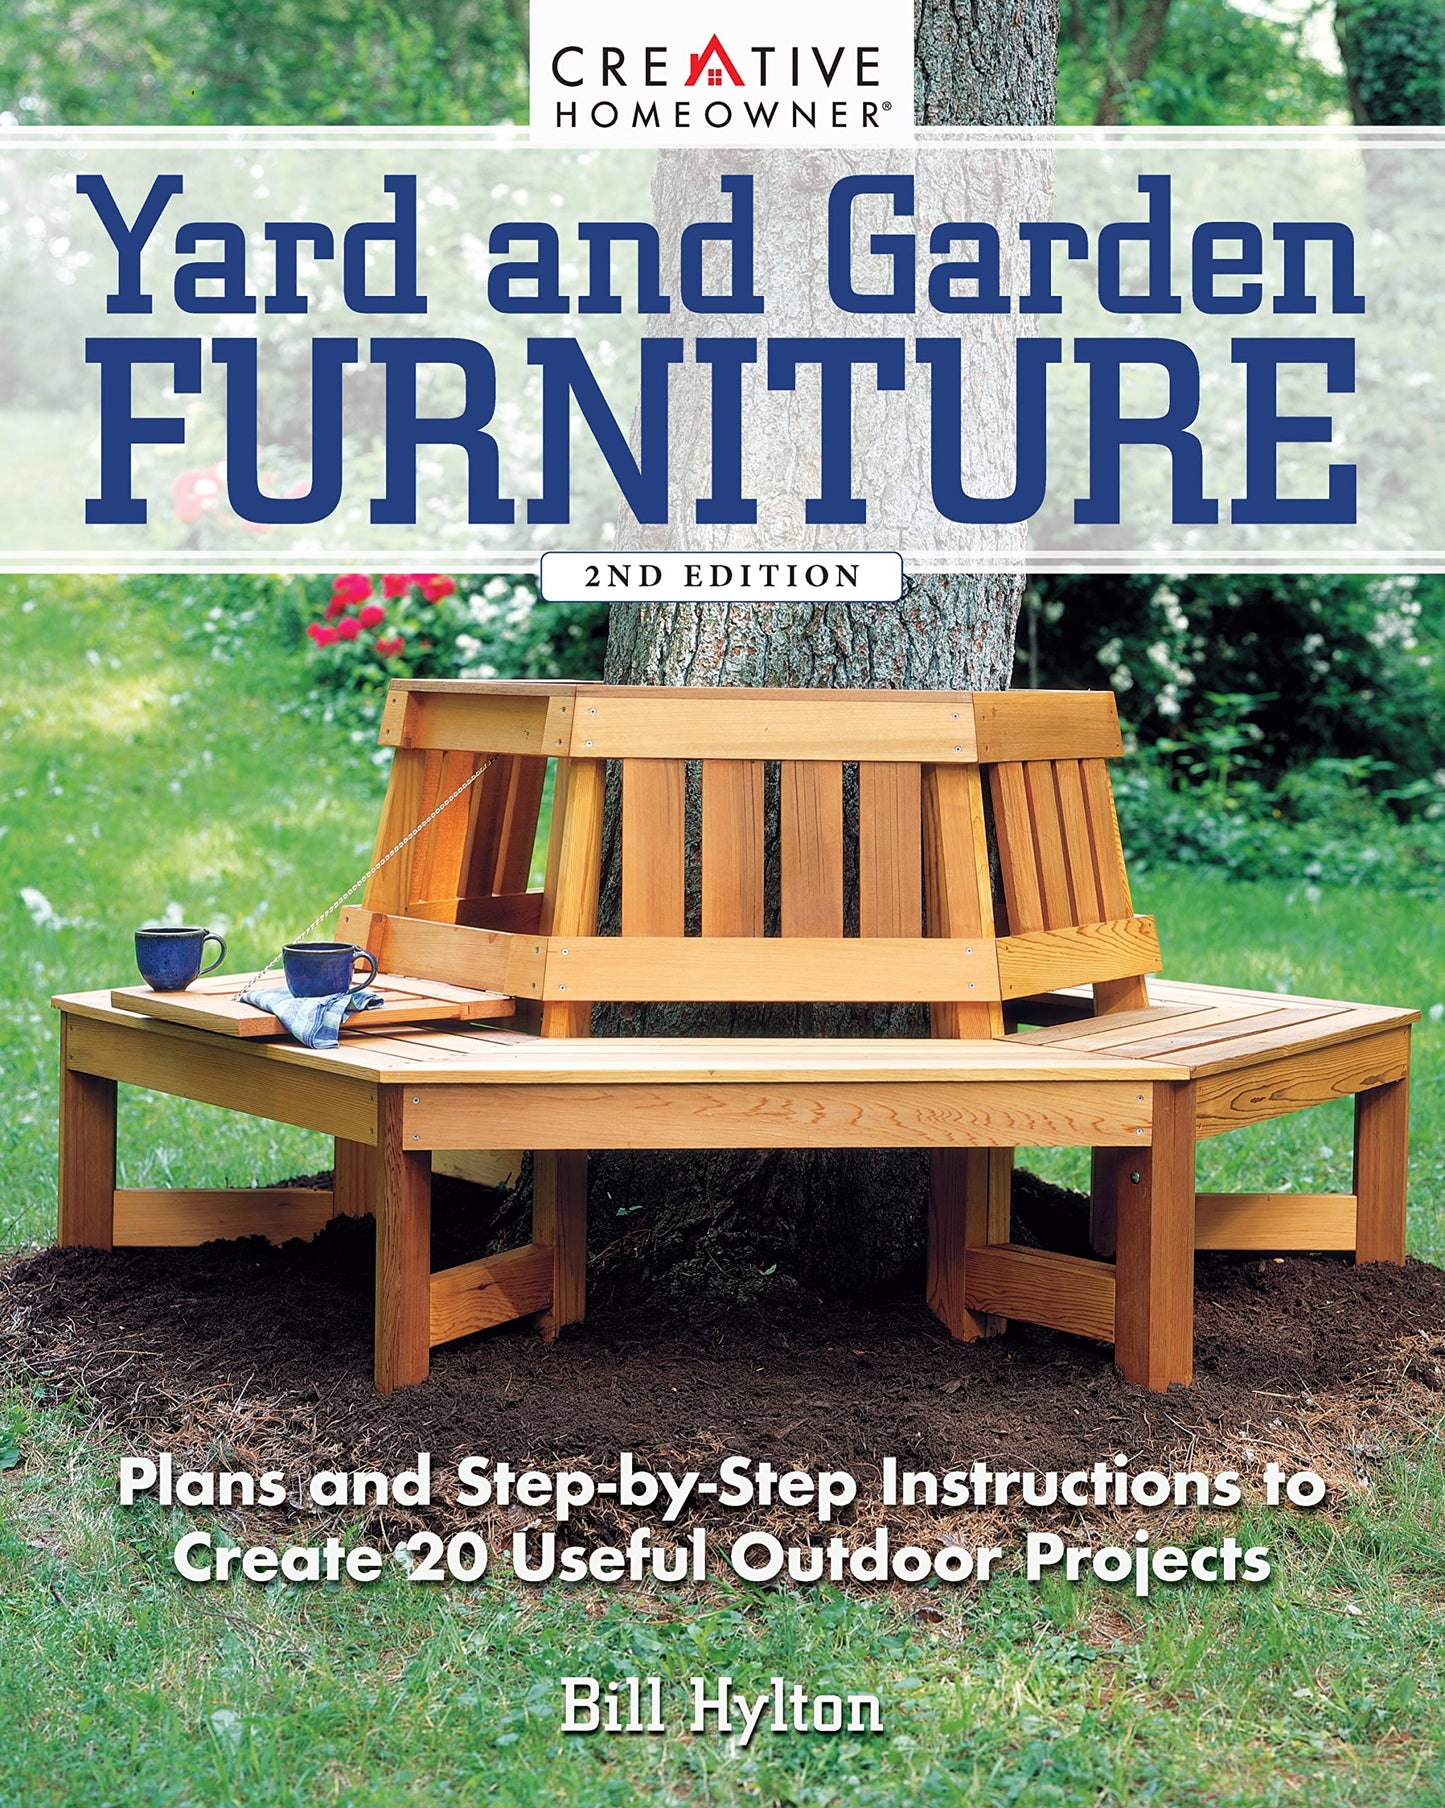 Yard and Garden Furniture, 2nd Edition: Plans and Step-by-Step Instructions to Create 20 Useful Outdoor Projects (Creative Homeowner) DIY Benches,